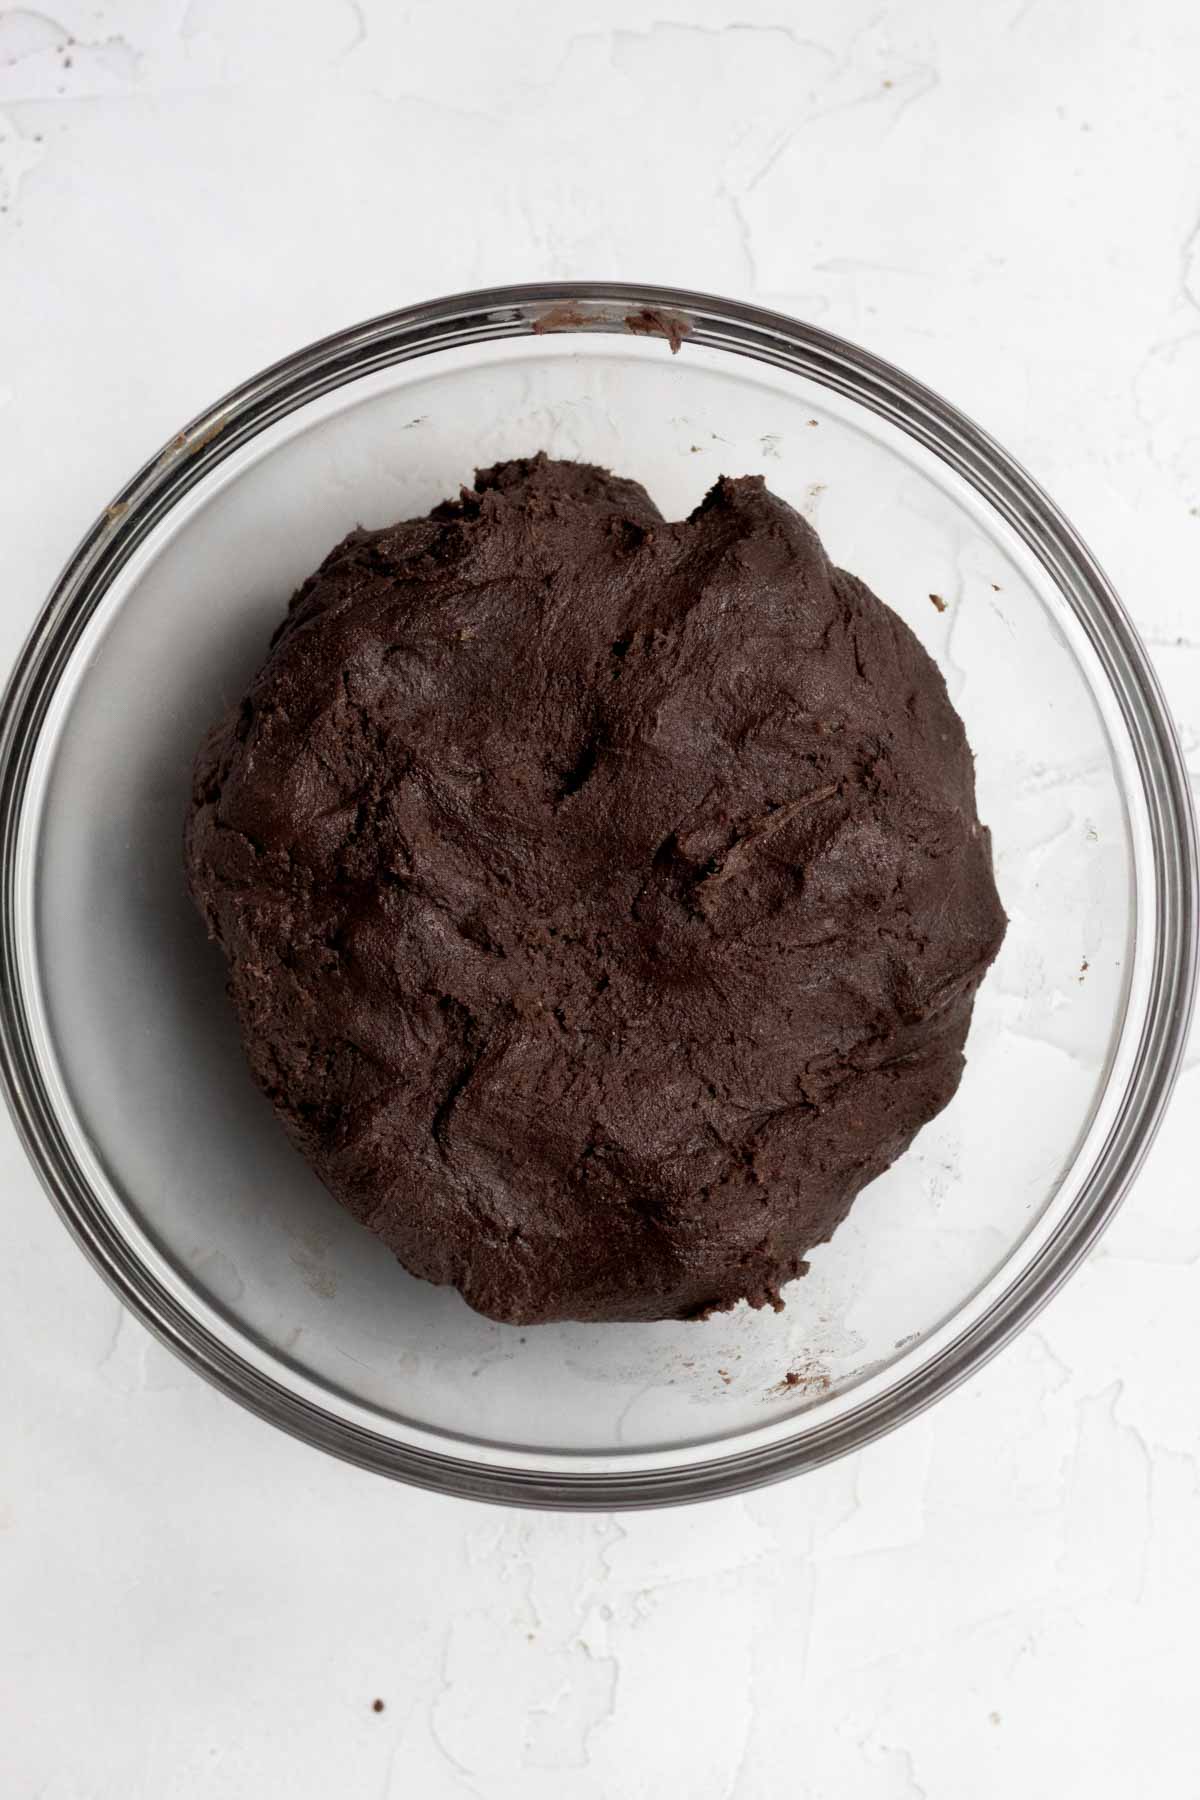 Mixing the wet and and dry ingredients into a dark chocolatey cookie batter.